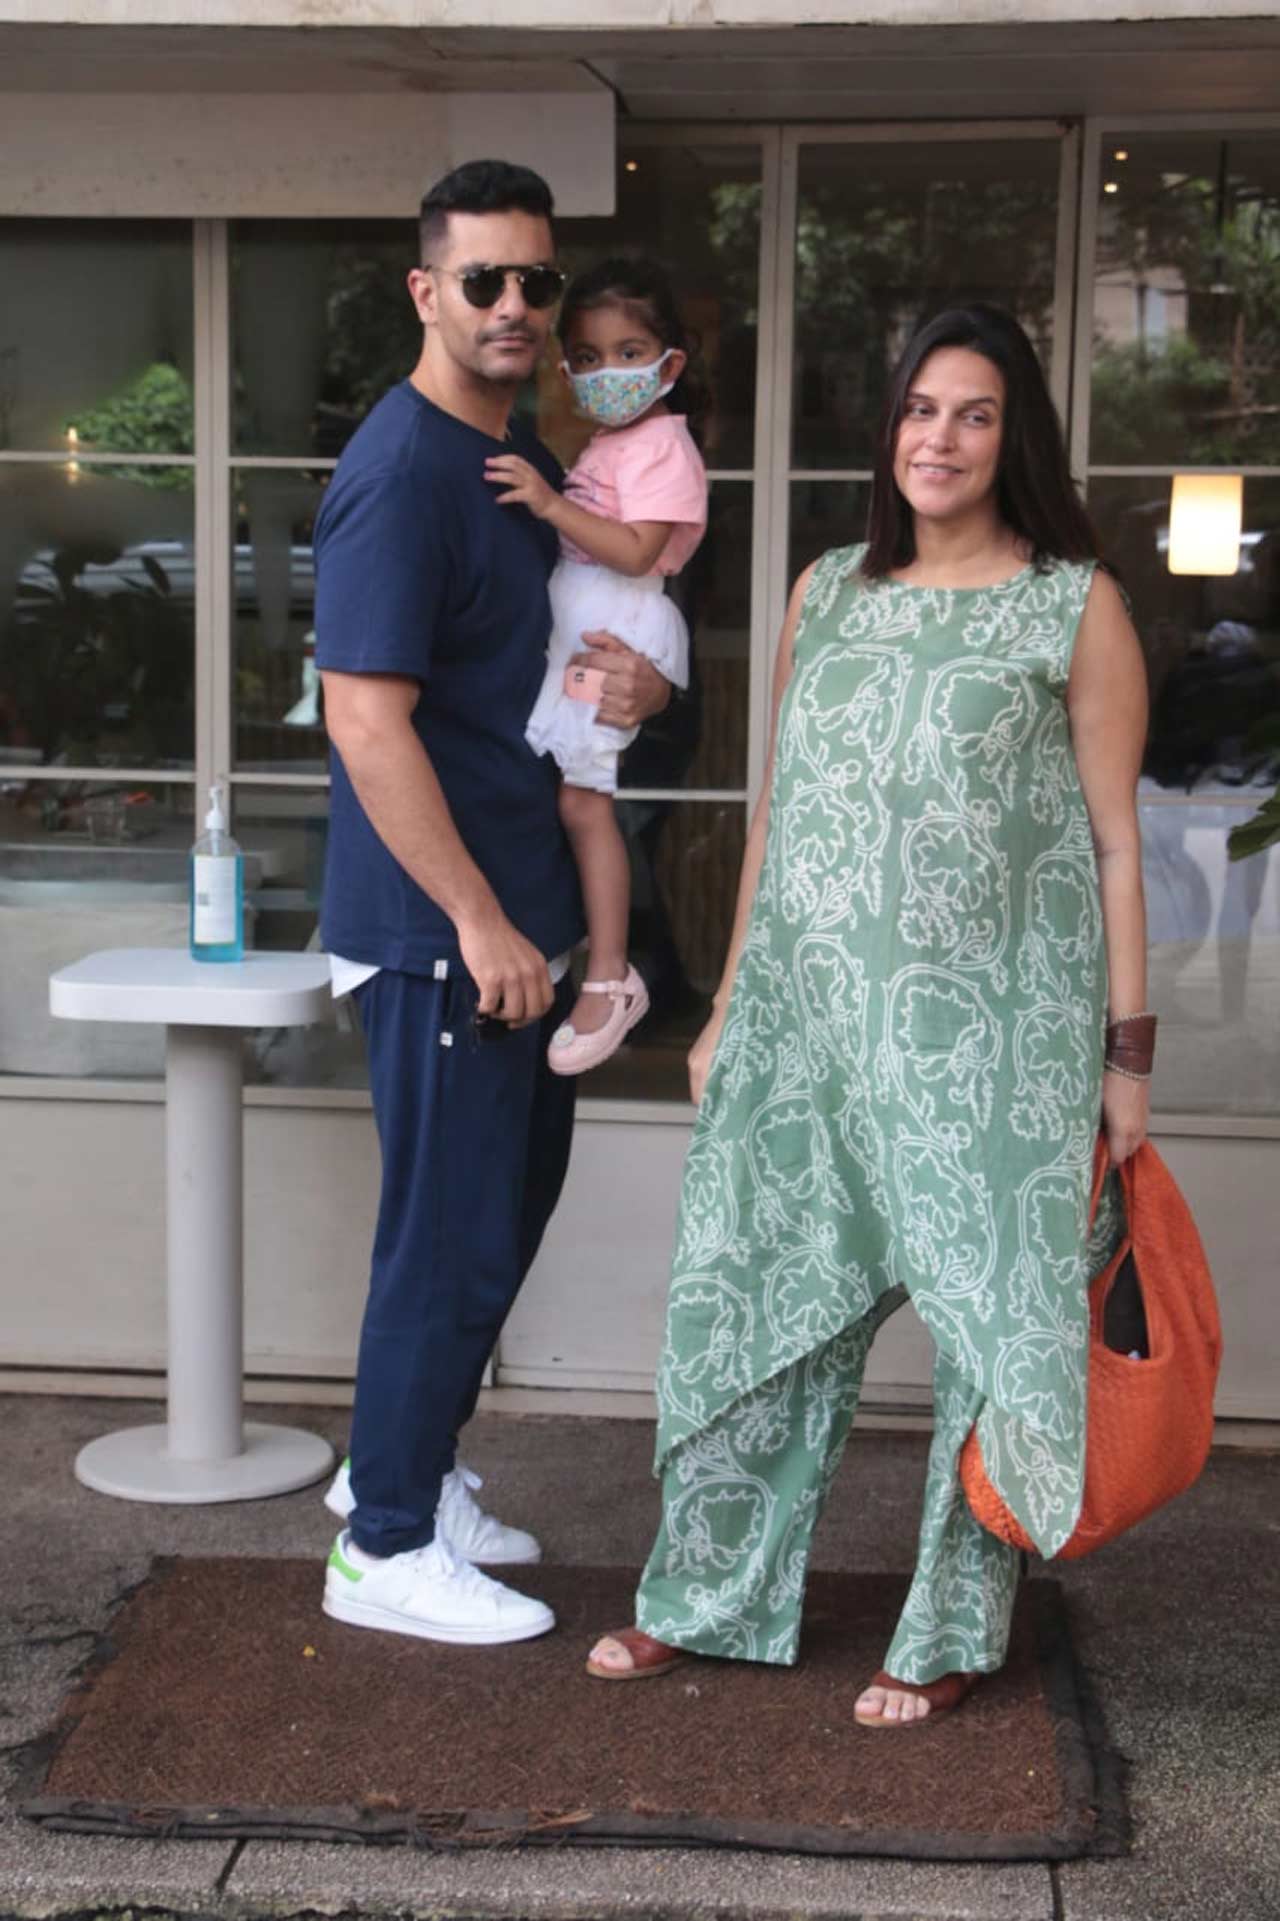 Neha Dhupia was snapped with her husband Angad Bedi and daughter Mehr Dhupia Bedi strolling on the streets of Bandra, Mumbai. Her pastel green kaftan suit was a perfect combination where style met comfort. Aren’t they a sight for sore eyes!